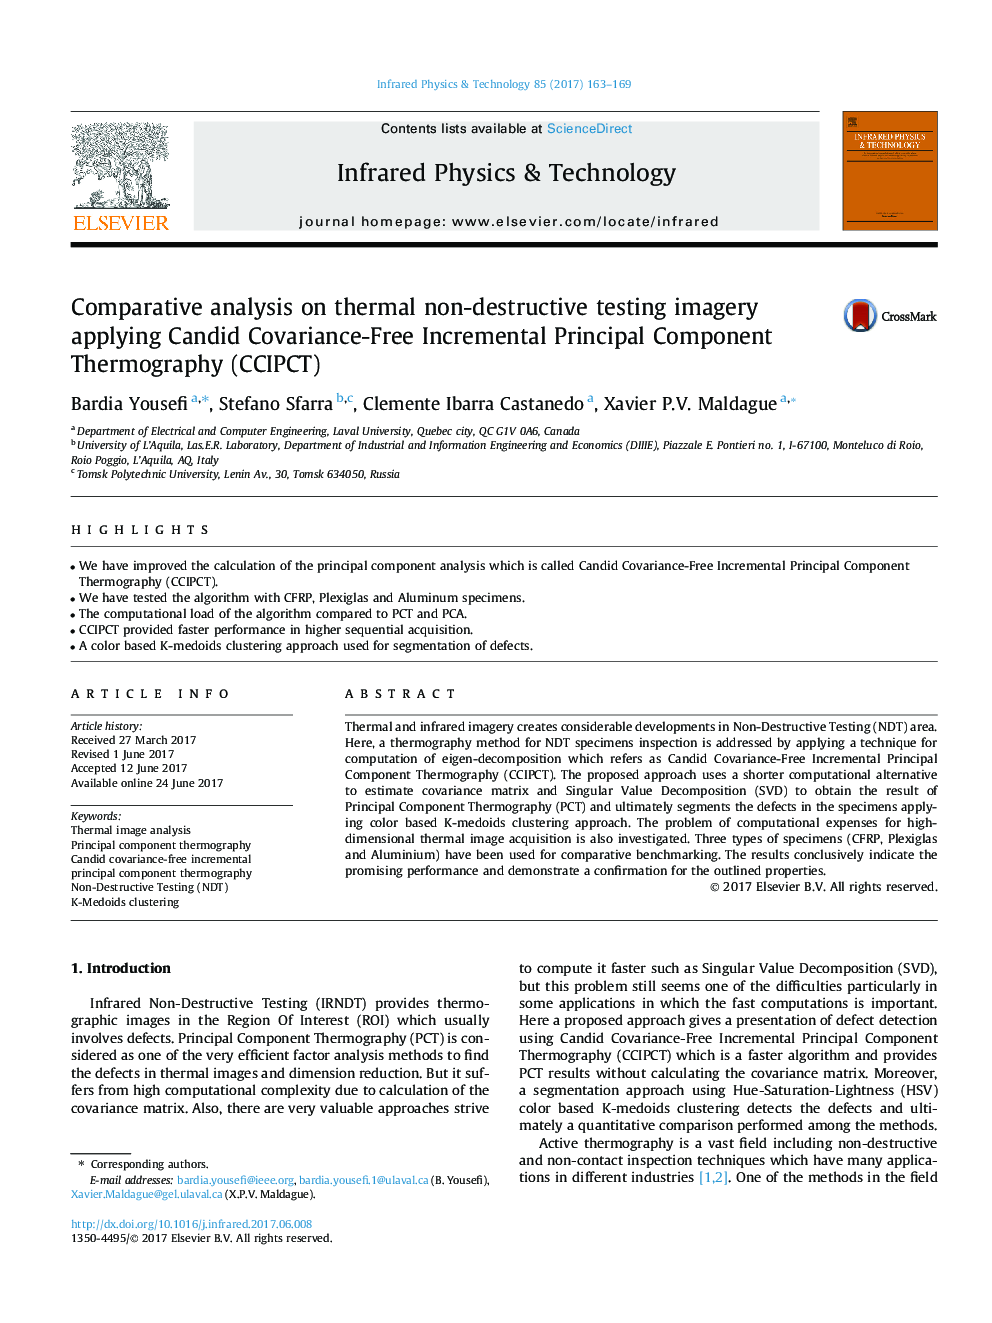 Comparative analysis on thermal non-destructive testing imagery applying Candid Covariance-Free Incremental Principal Component Thermography (CCIPCT)